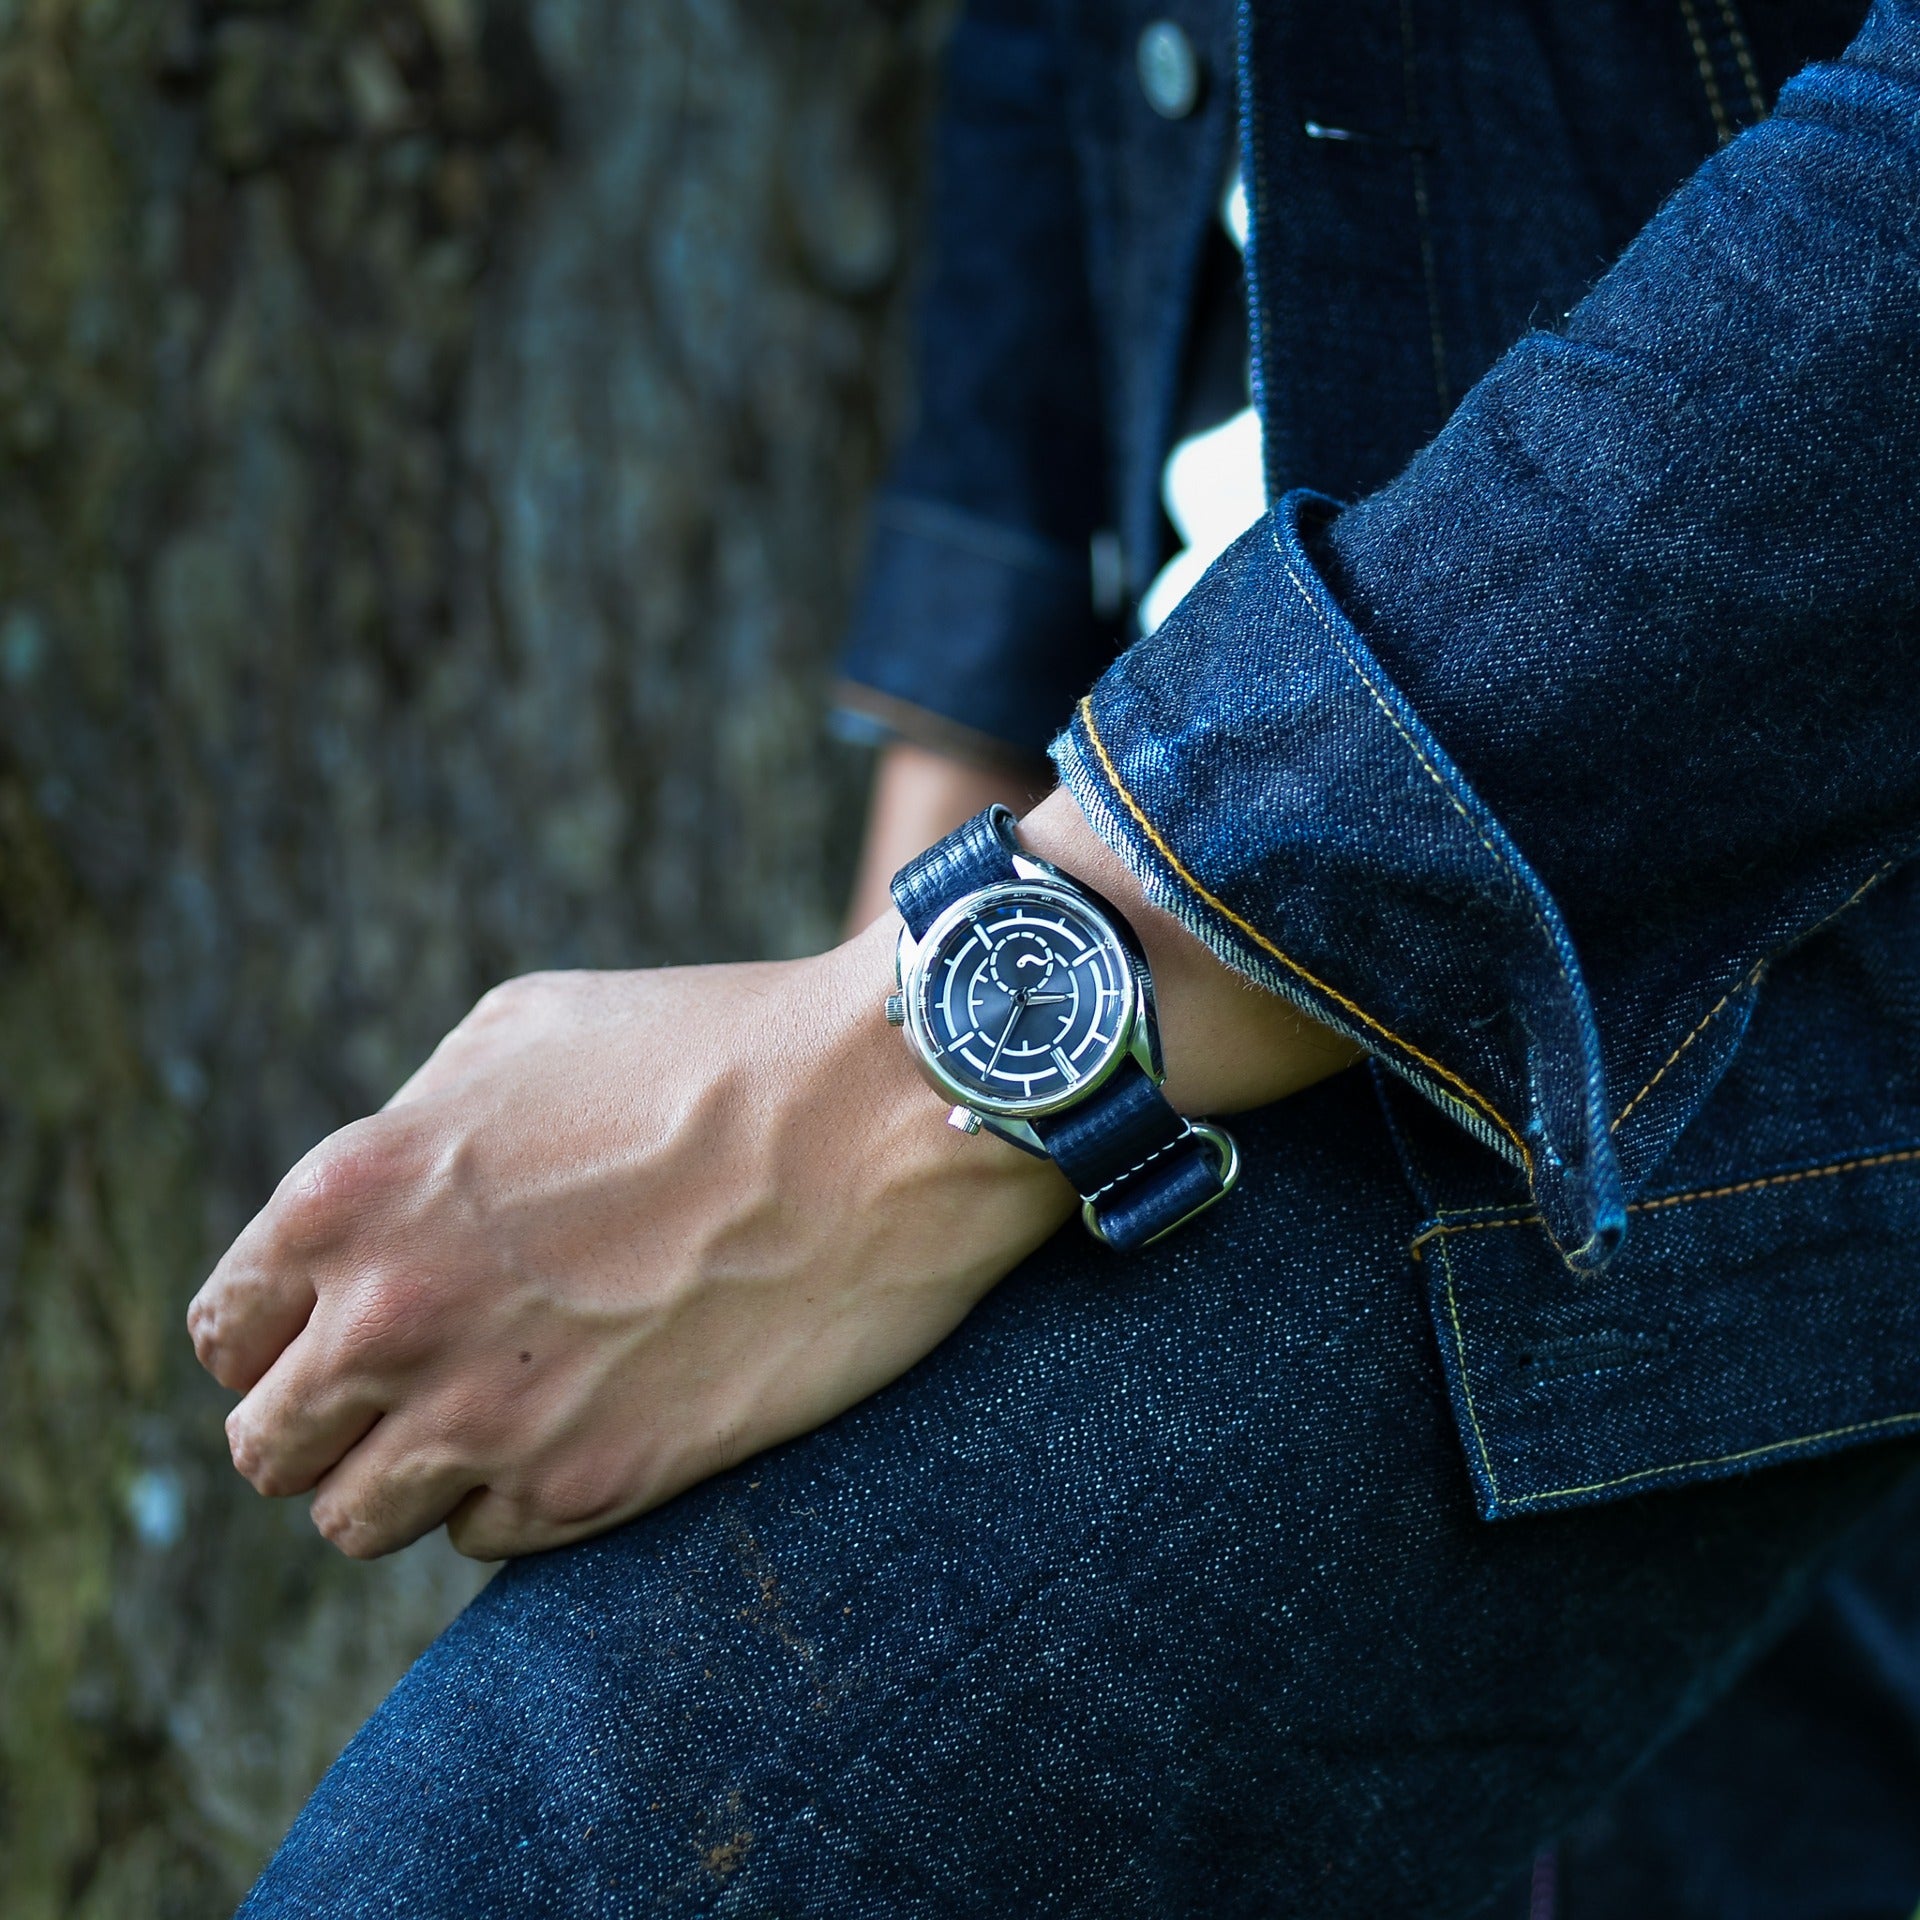 Forging ahead with the Tempest Carbon2 - Wristwatch Review